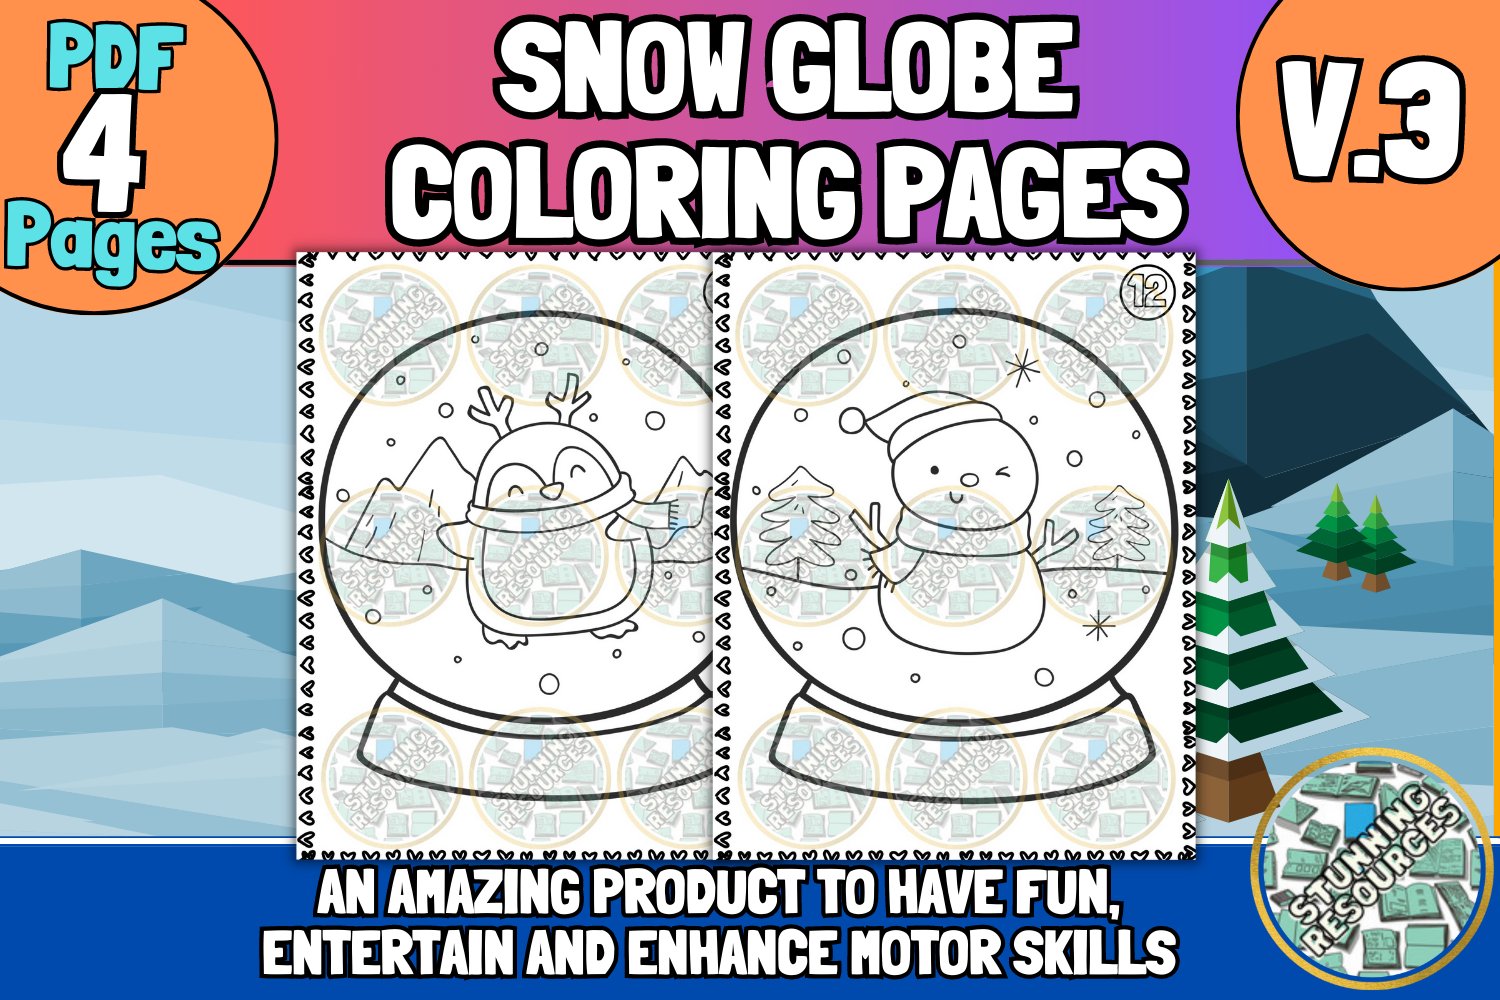 Snow globe coloring pages pdf pages v